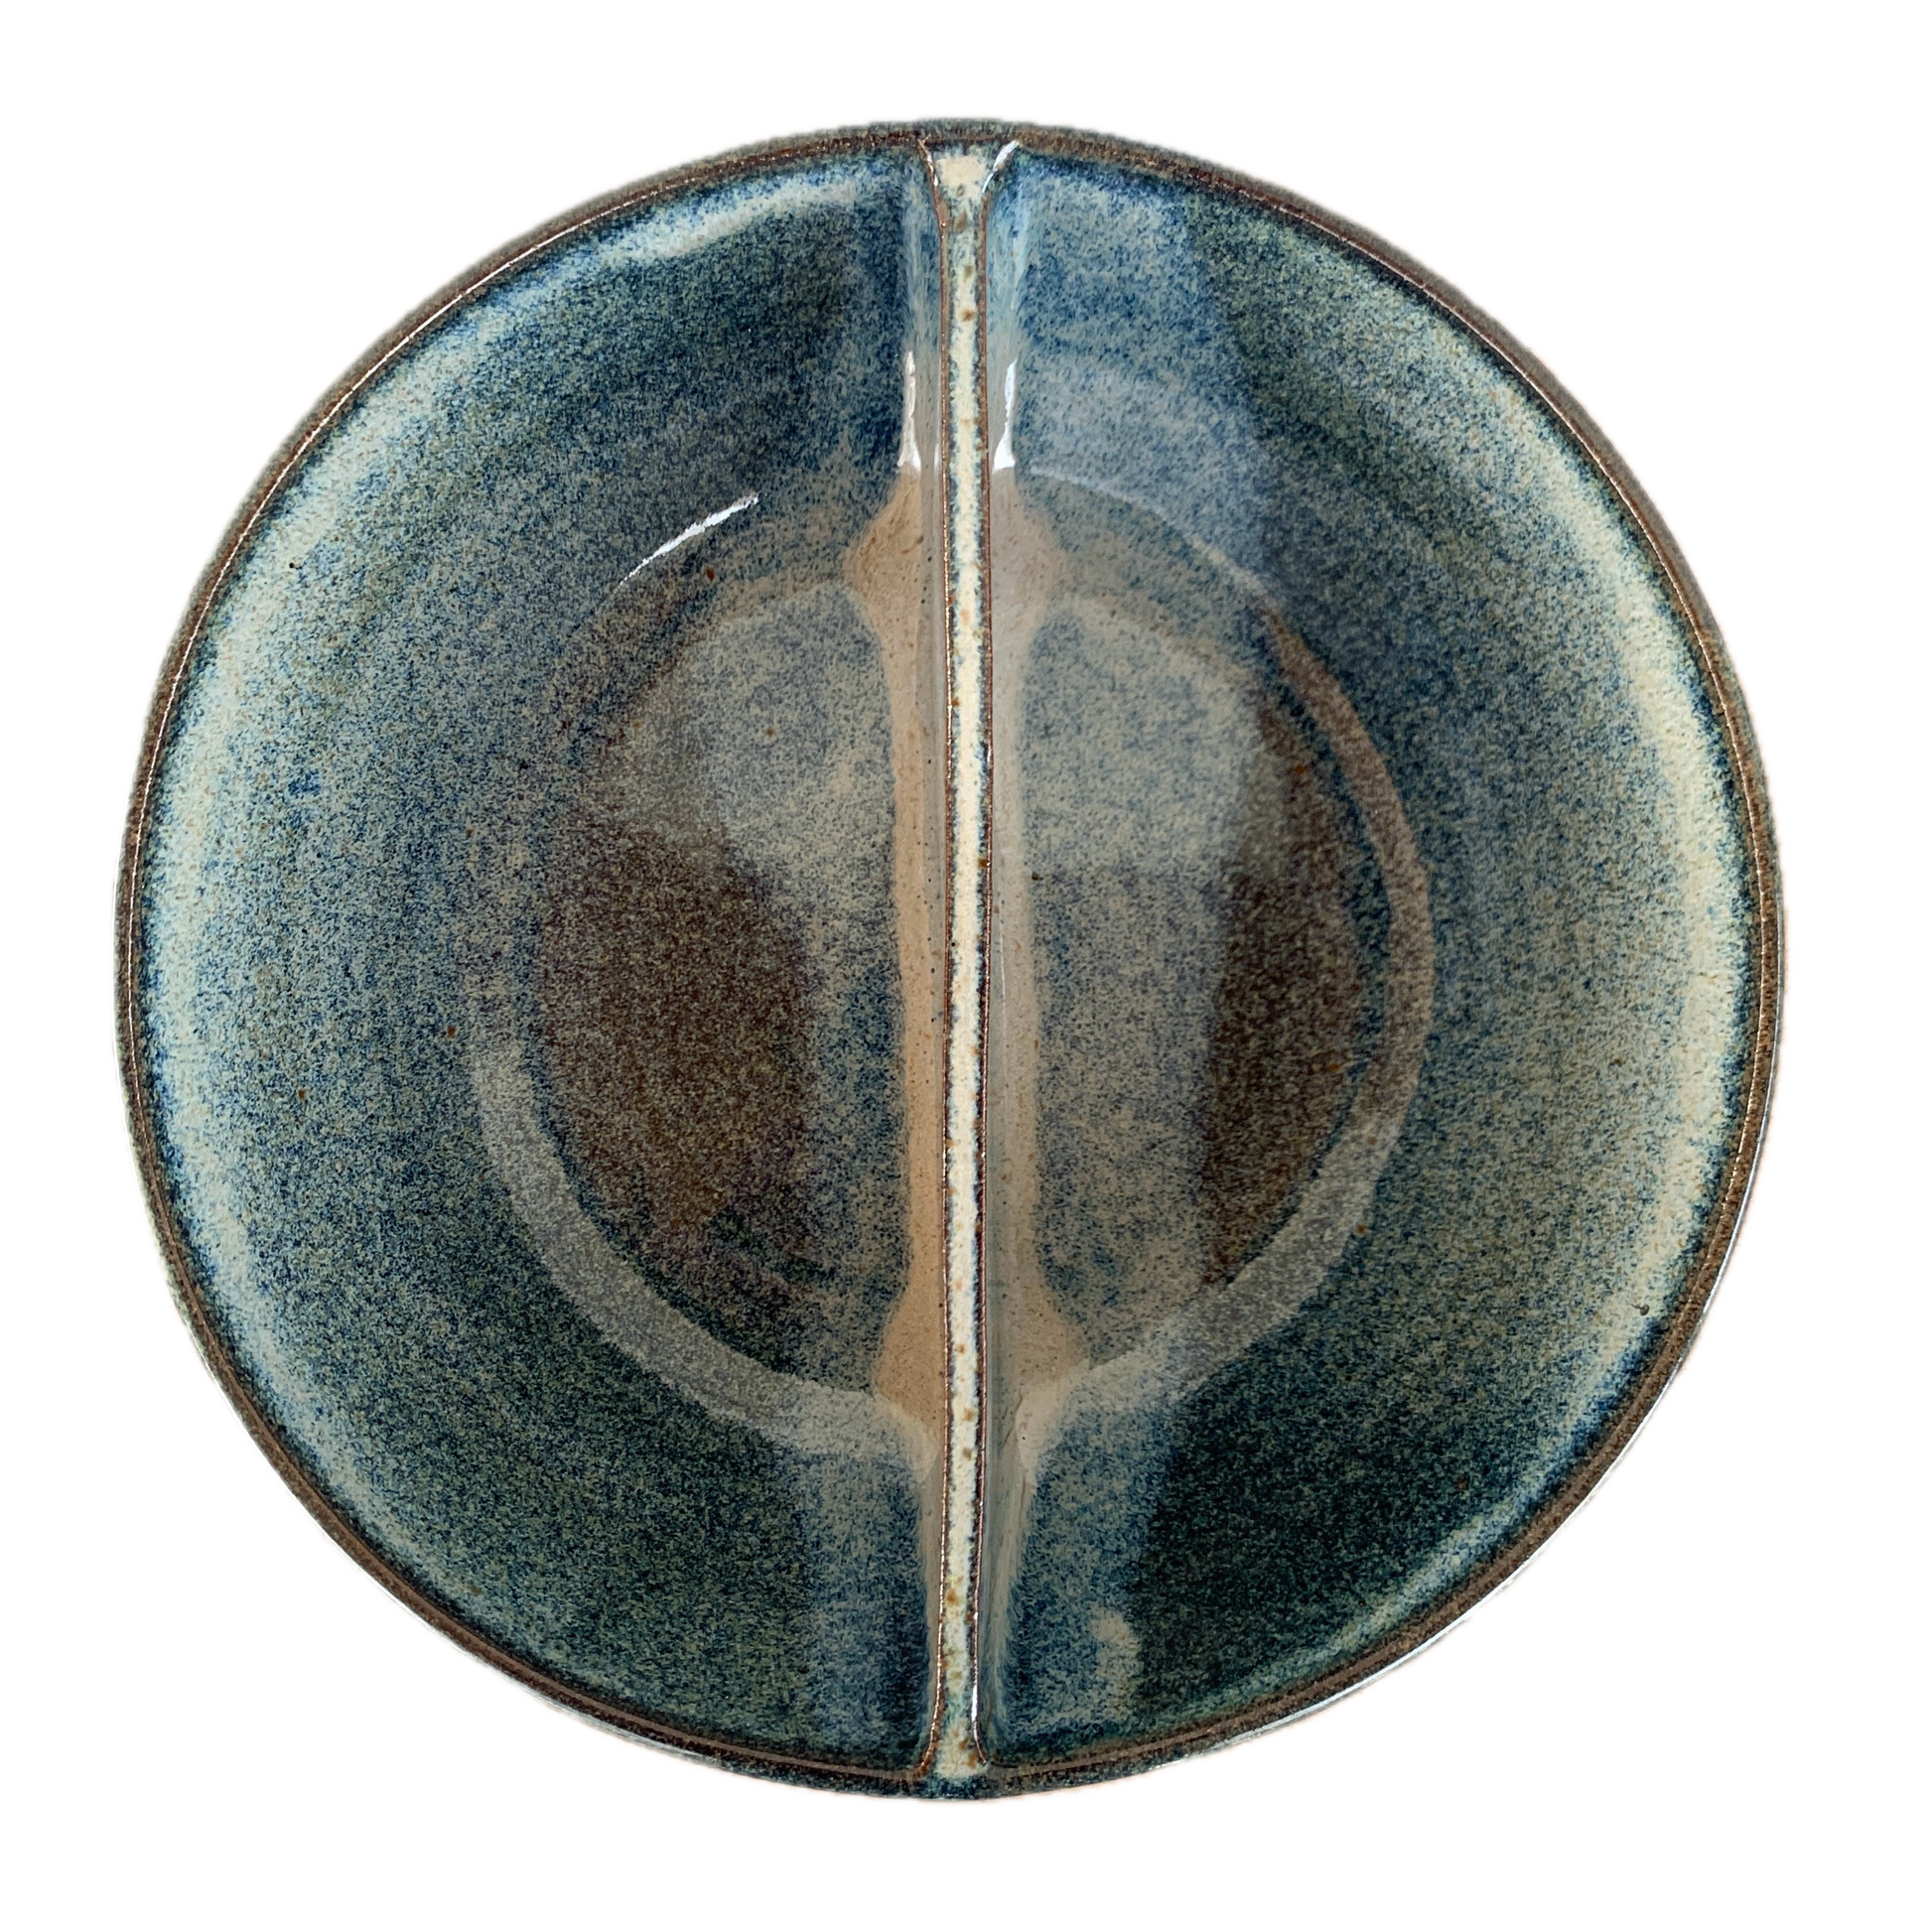 50/50-OFS Collection fullandfulfilled 50 50 plate 50/50 bowl starch solution McDougall Program 5050 diet wfpb vegan plant based Stone Kitchenware fullandfulfilled